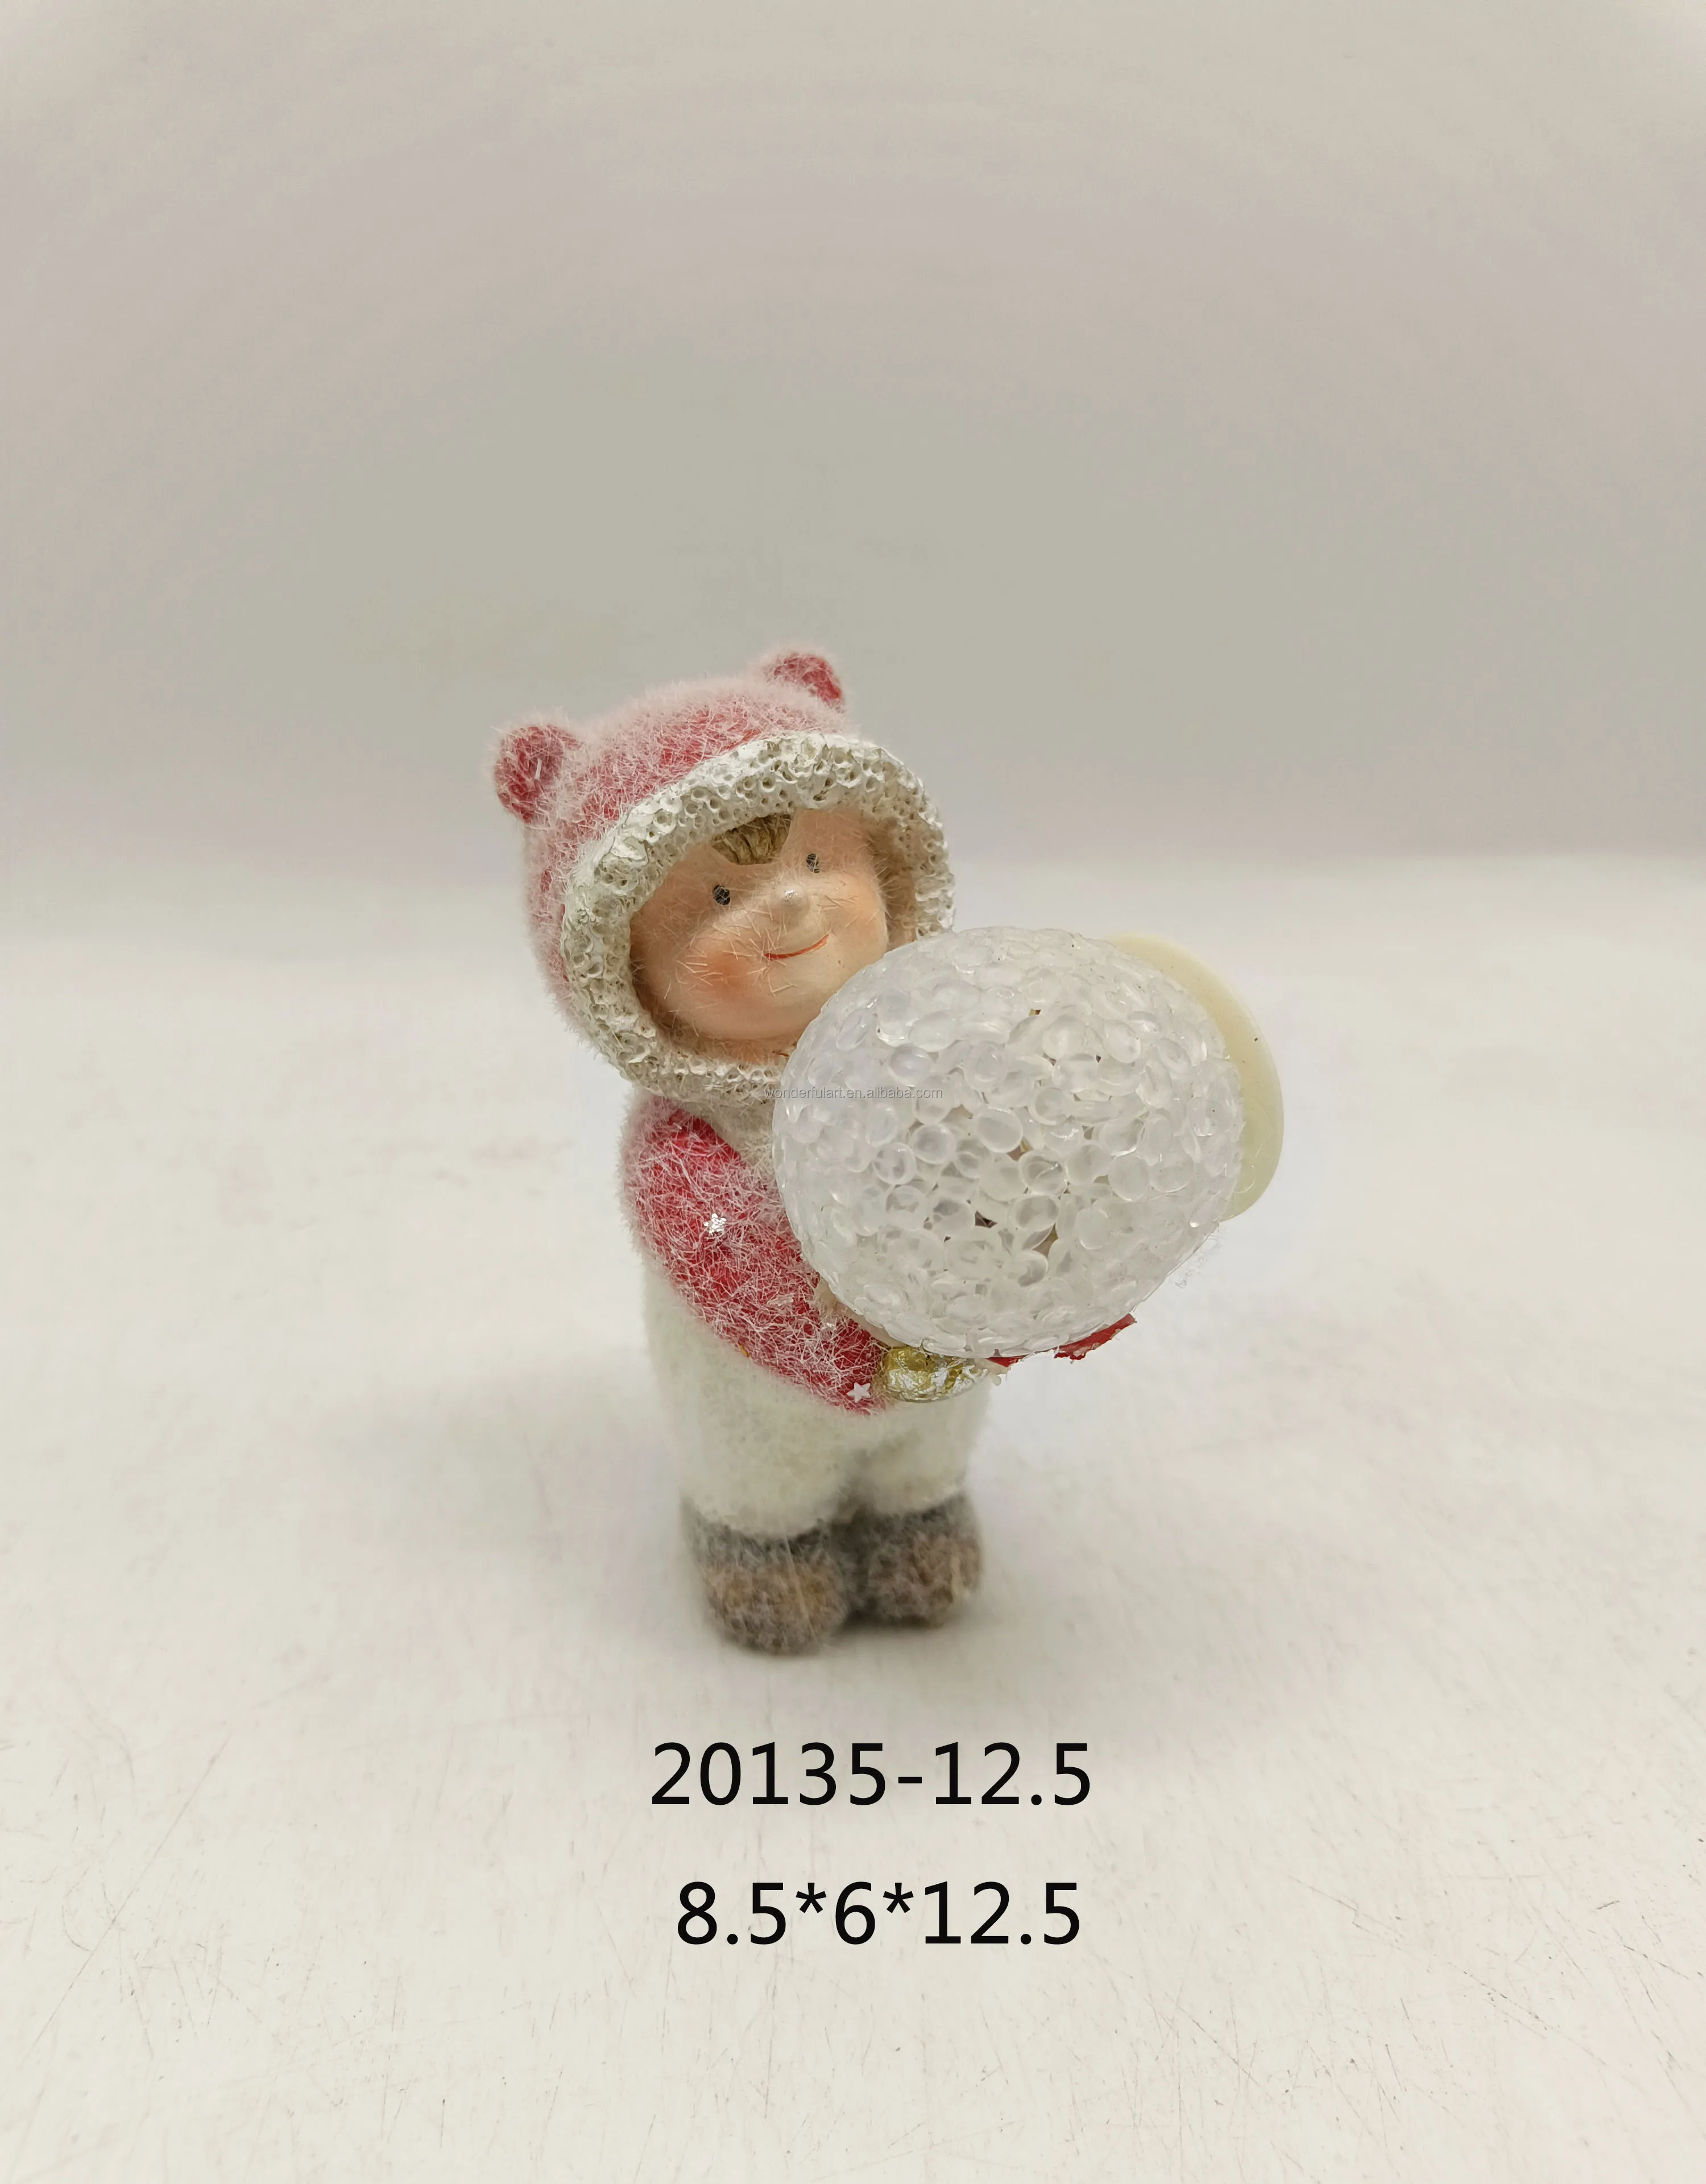 Cute Christmas Child Statue Winter Kid Figurine Resin Sculpture for Home Decor Desktop Decoration Gift for Garden and Holiday